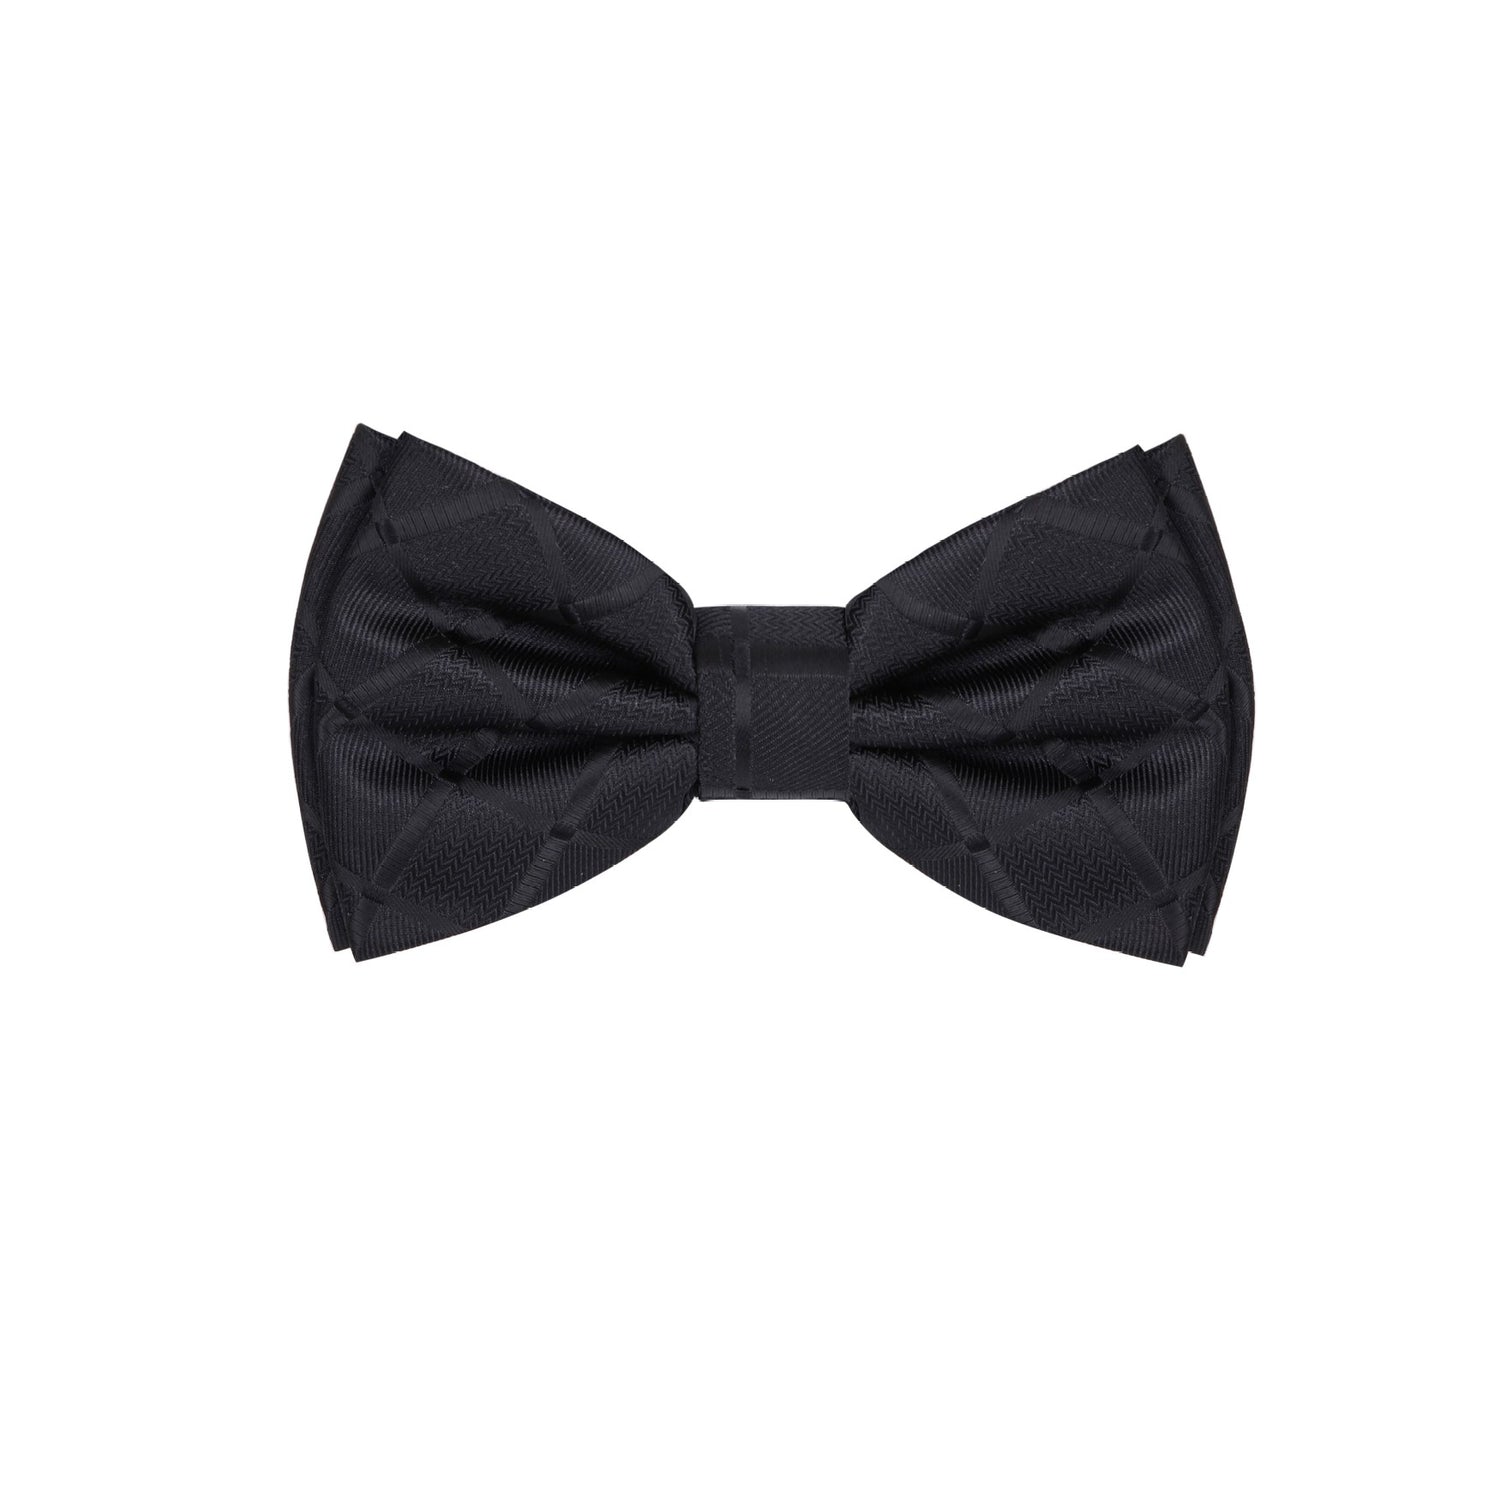 Black with Geometric Texture Bow Tie